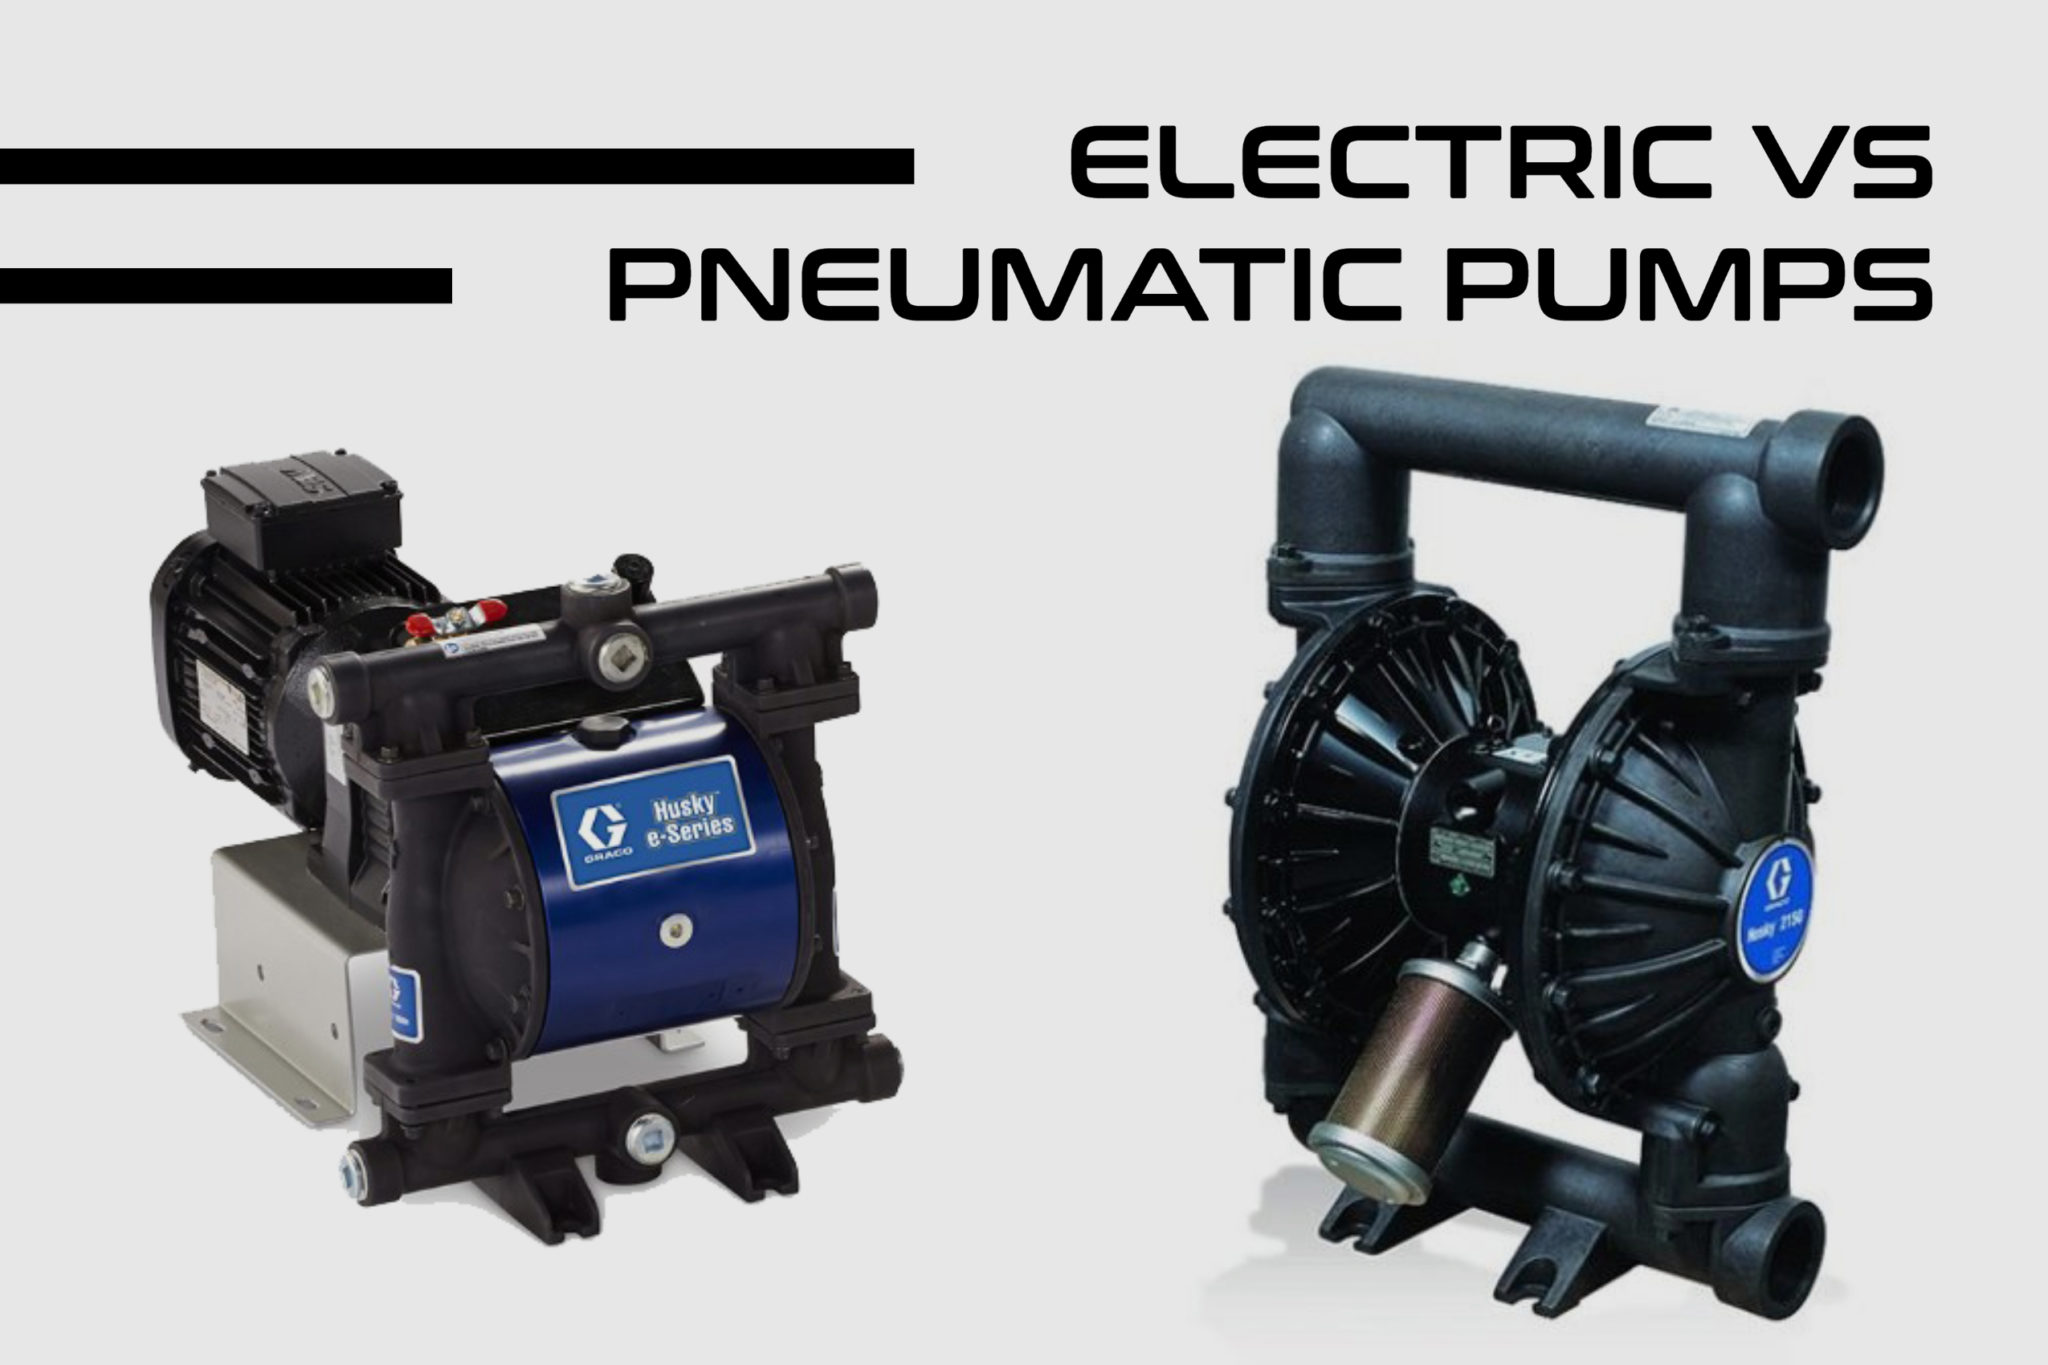 https://www.chreed.com/wp-content/uploads/2021/11/electric-vs-pneumatic-pumps2-scaled.jpg